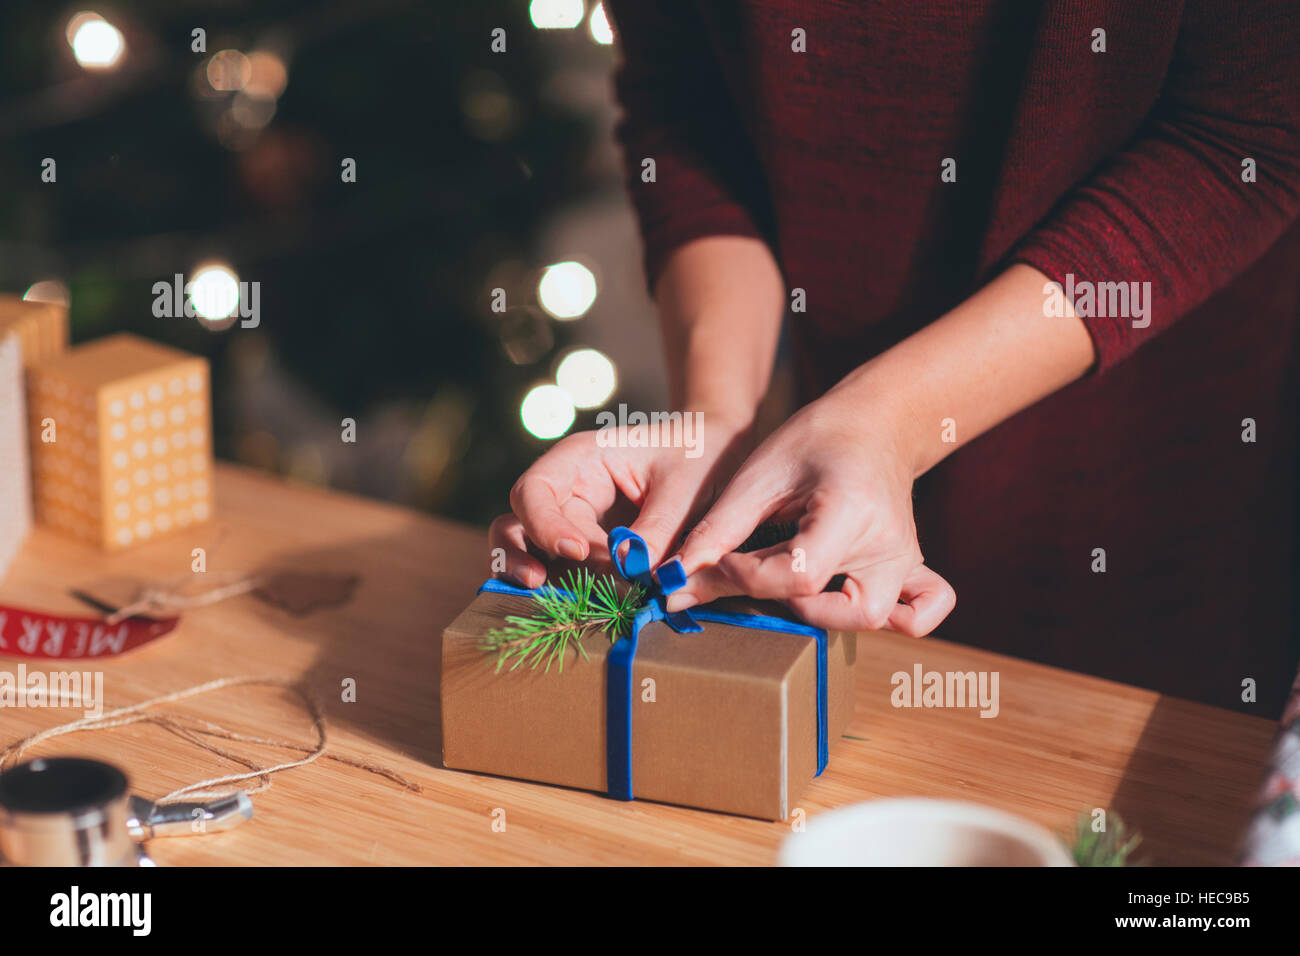 Woman Wrapping Christmas Present in Christmas setting Stock Photo